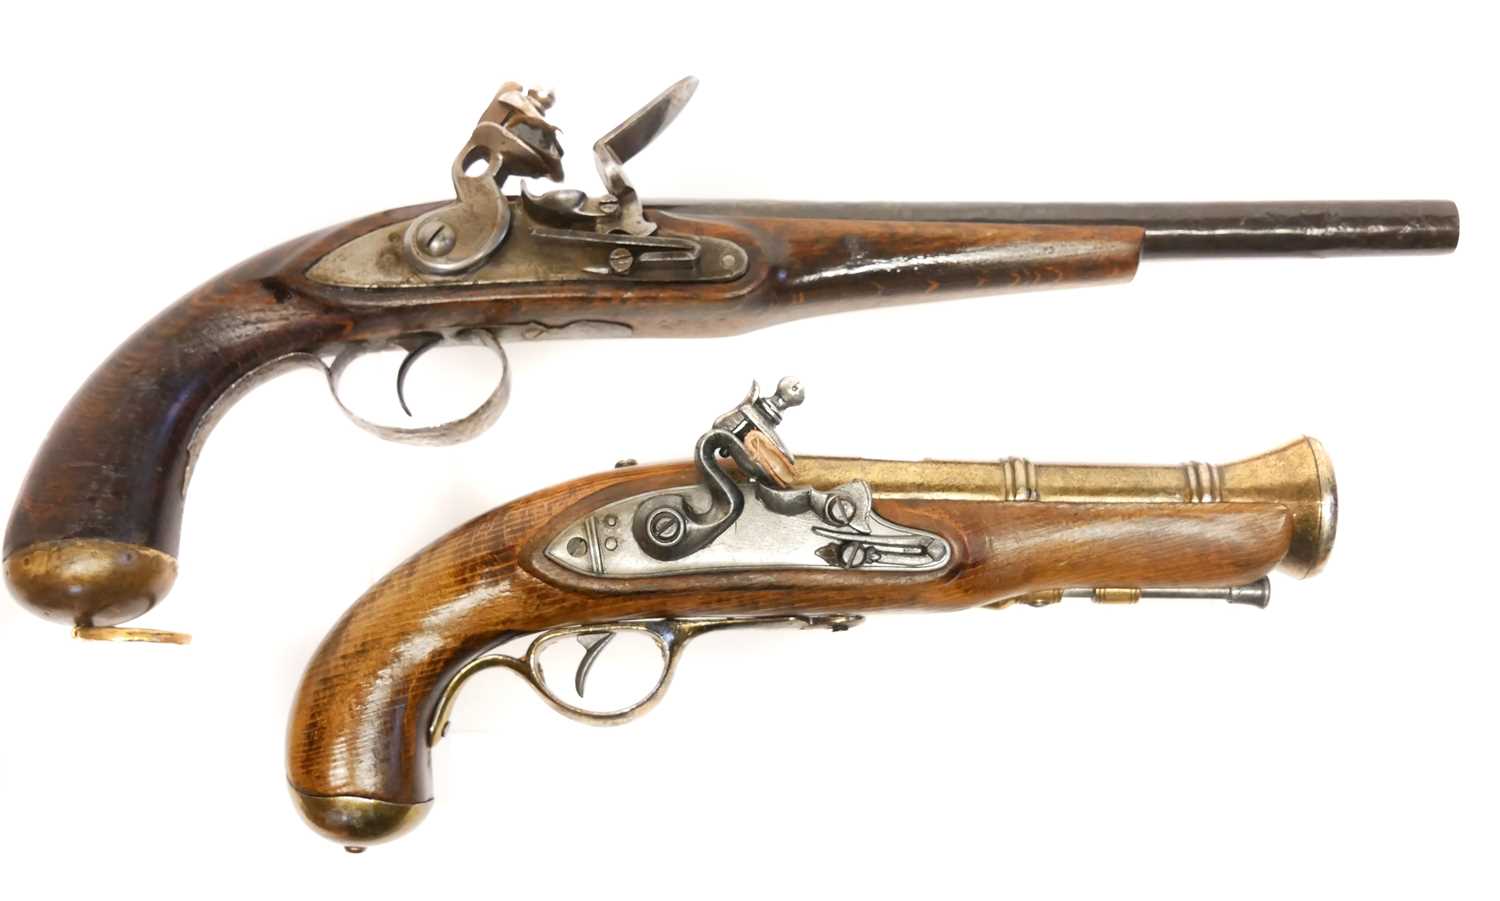 Composed flintlock pistol, and a replica pistol, the first with an antique 11.5 inch 22 bore